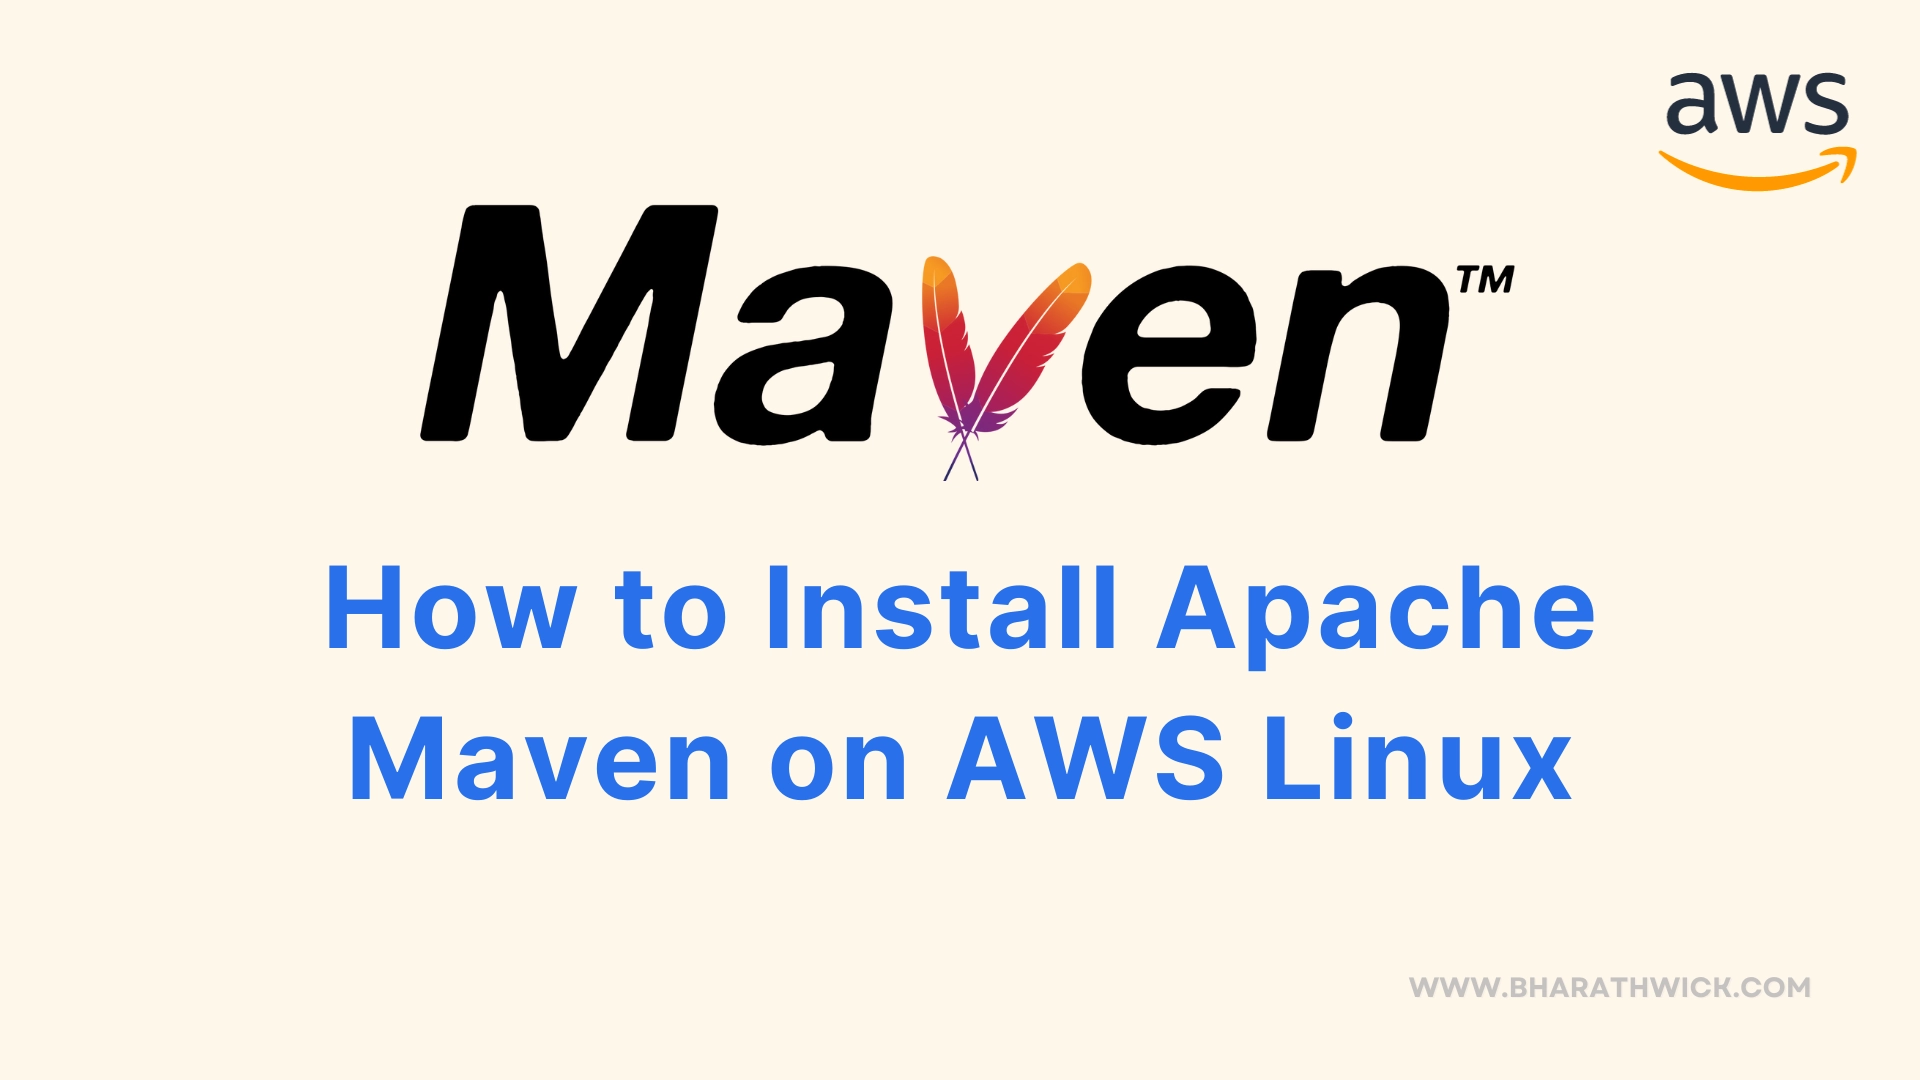 How to Install Apache Maven on AWS Linux